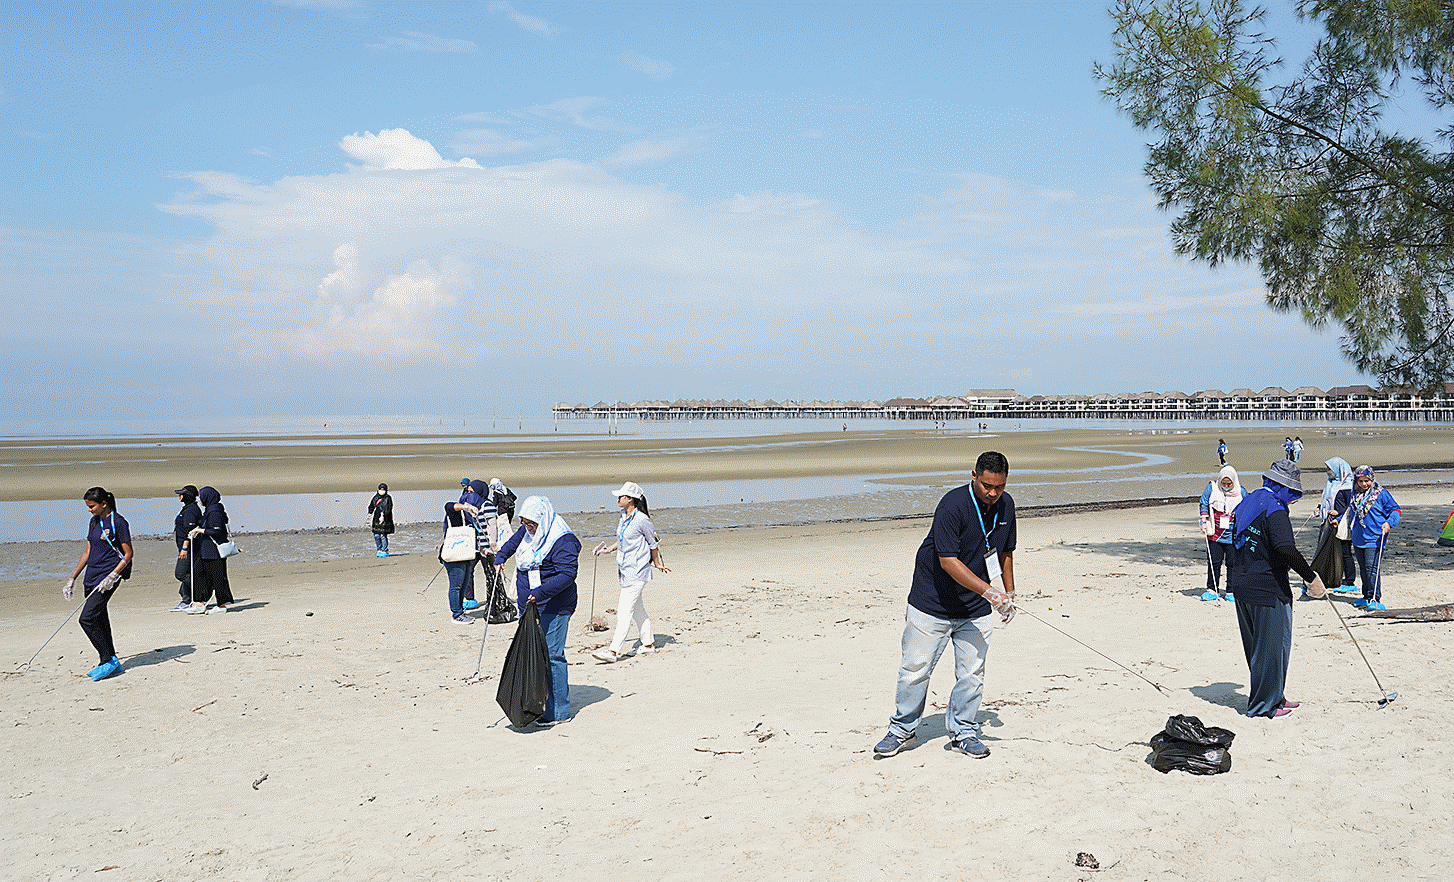 Photograph showing employees of Malaysia site participating in beach clean activity